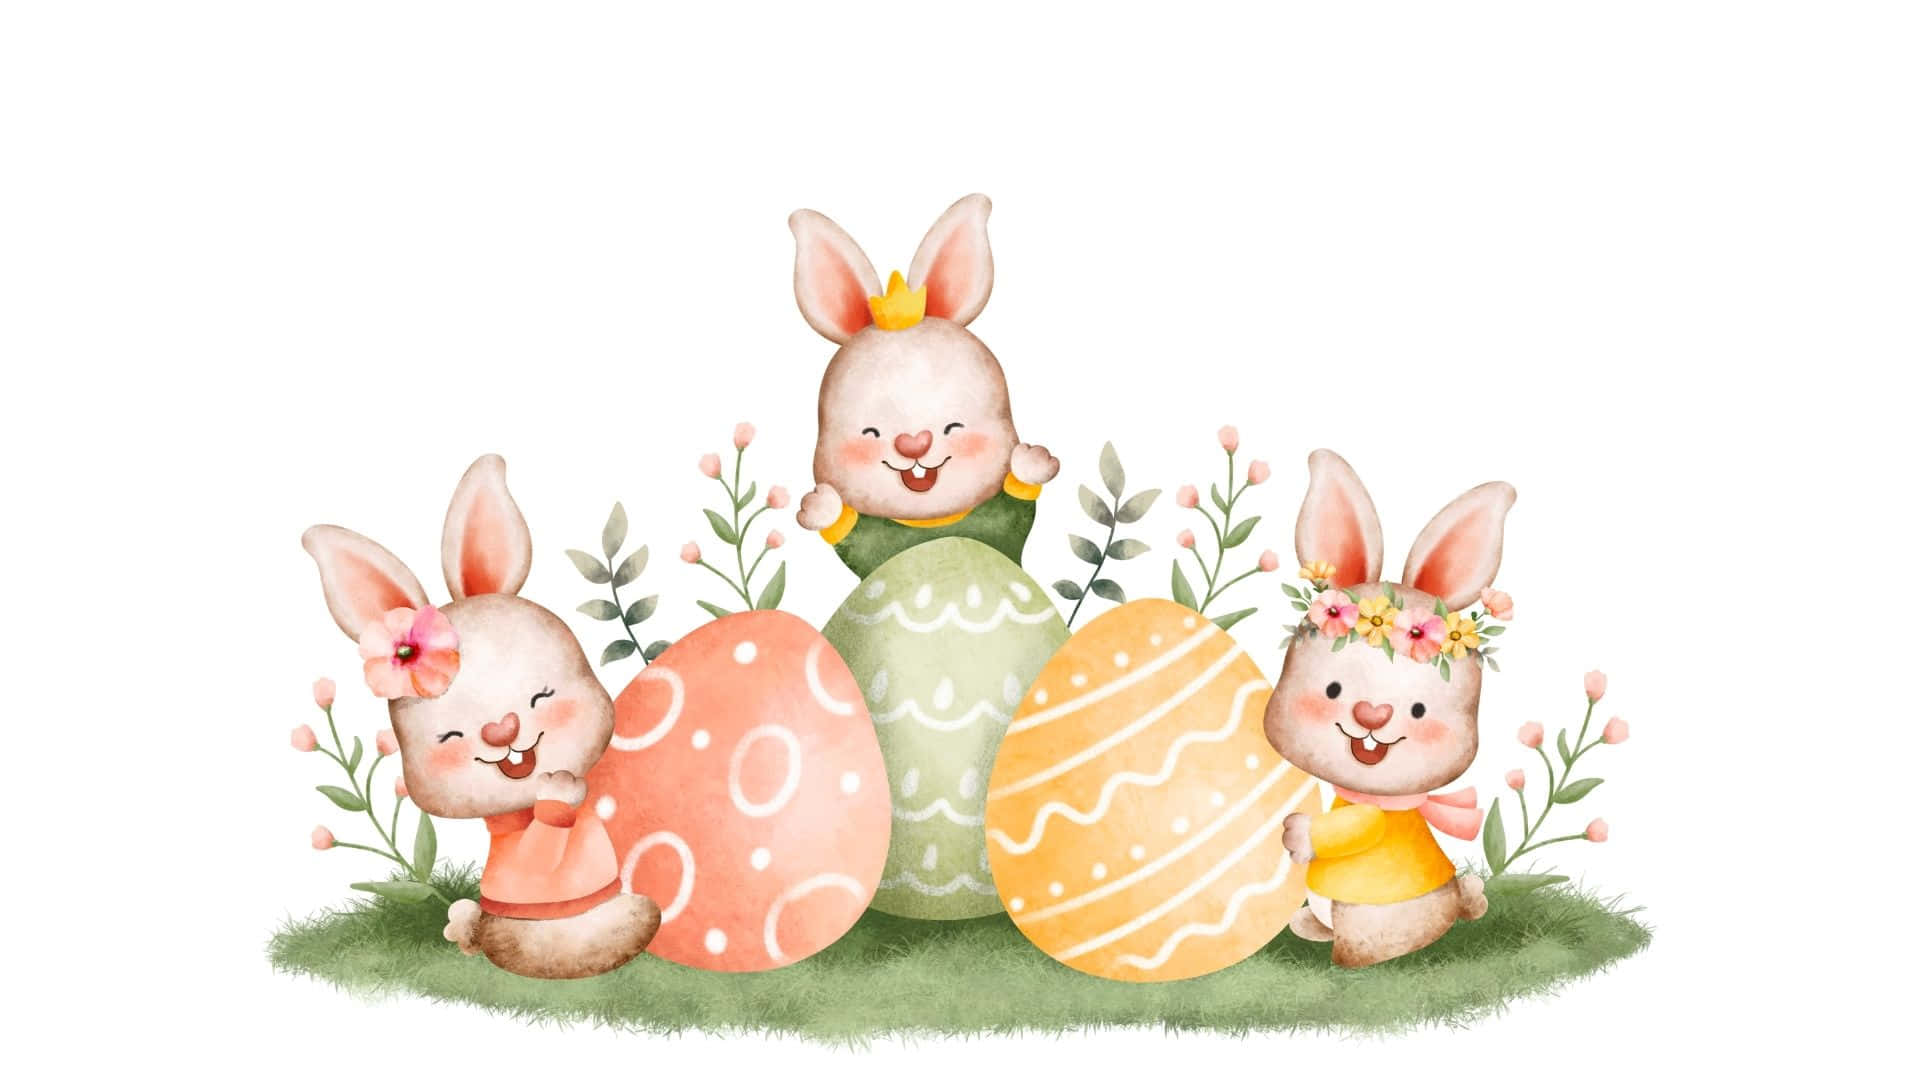 The Easter Bunny Is Here! Background